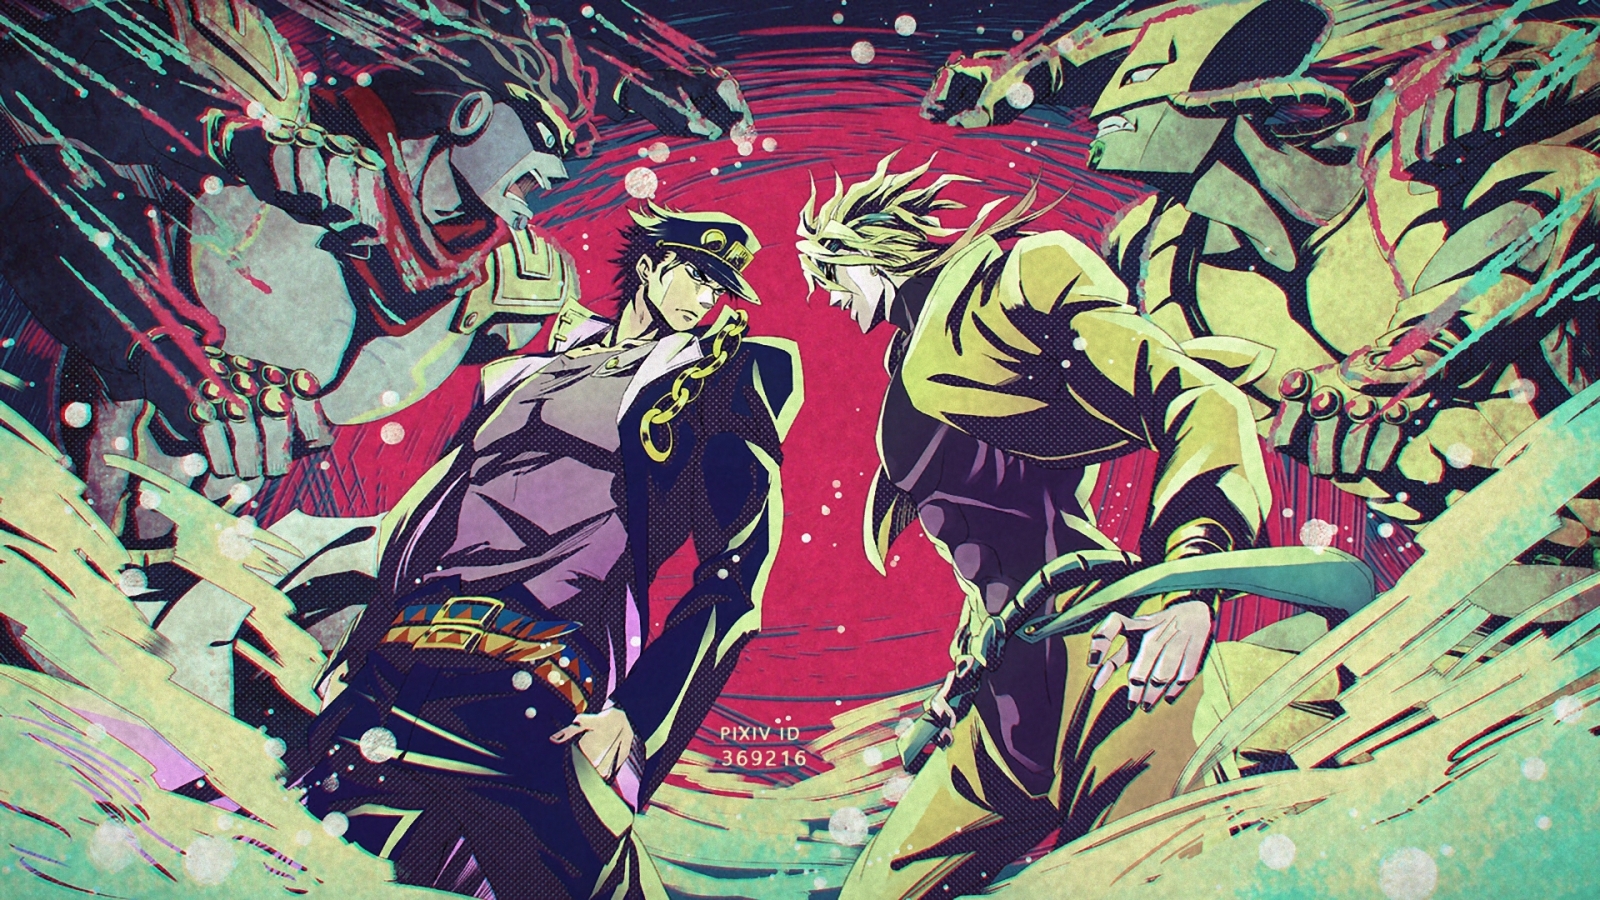 1600x900 Jojo S Bizarre Adventure Stardust Crusaders 1600x900 Resolution Wallpaper Hd Anime 4k Wallpapers Images Photos And Background